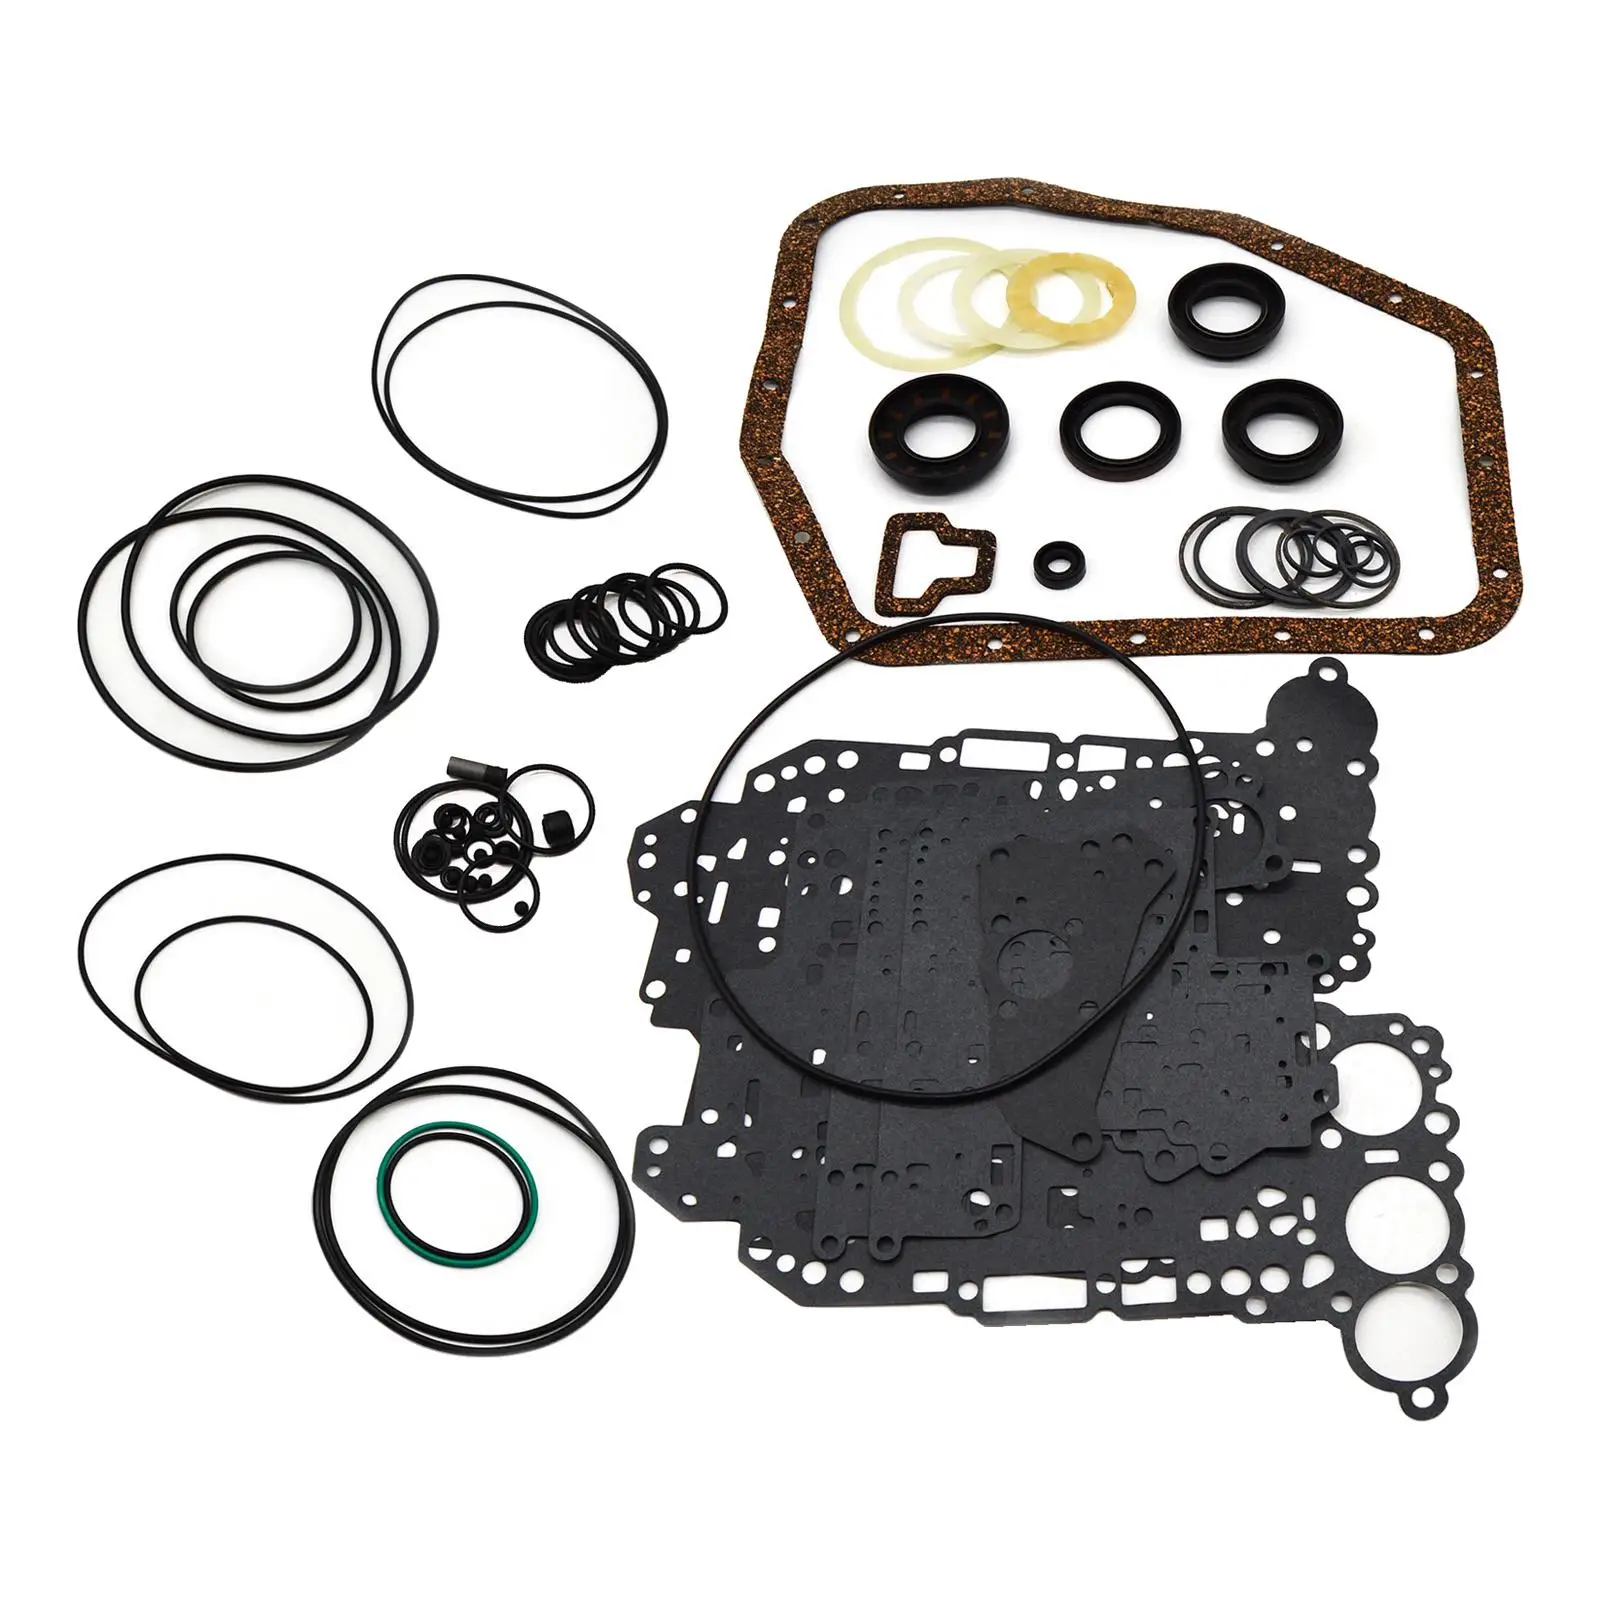 Overhaul Rebuild Kit Automatic Seals Tap Gaskets Minor Repair Kit Transmission Overhaul Kit Replacements for 7A-Fe A245E